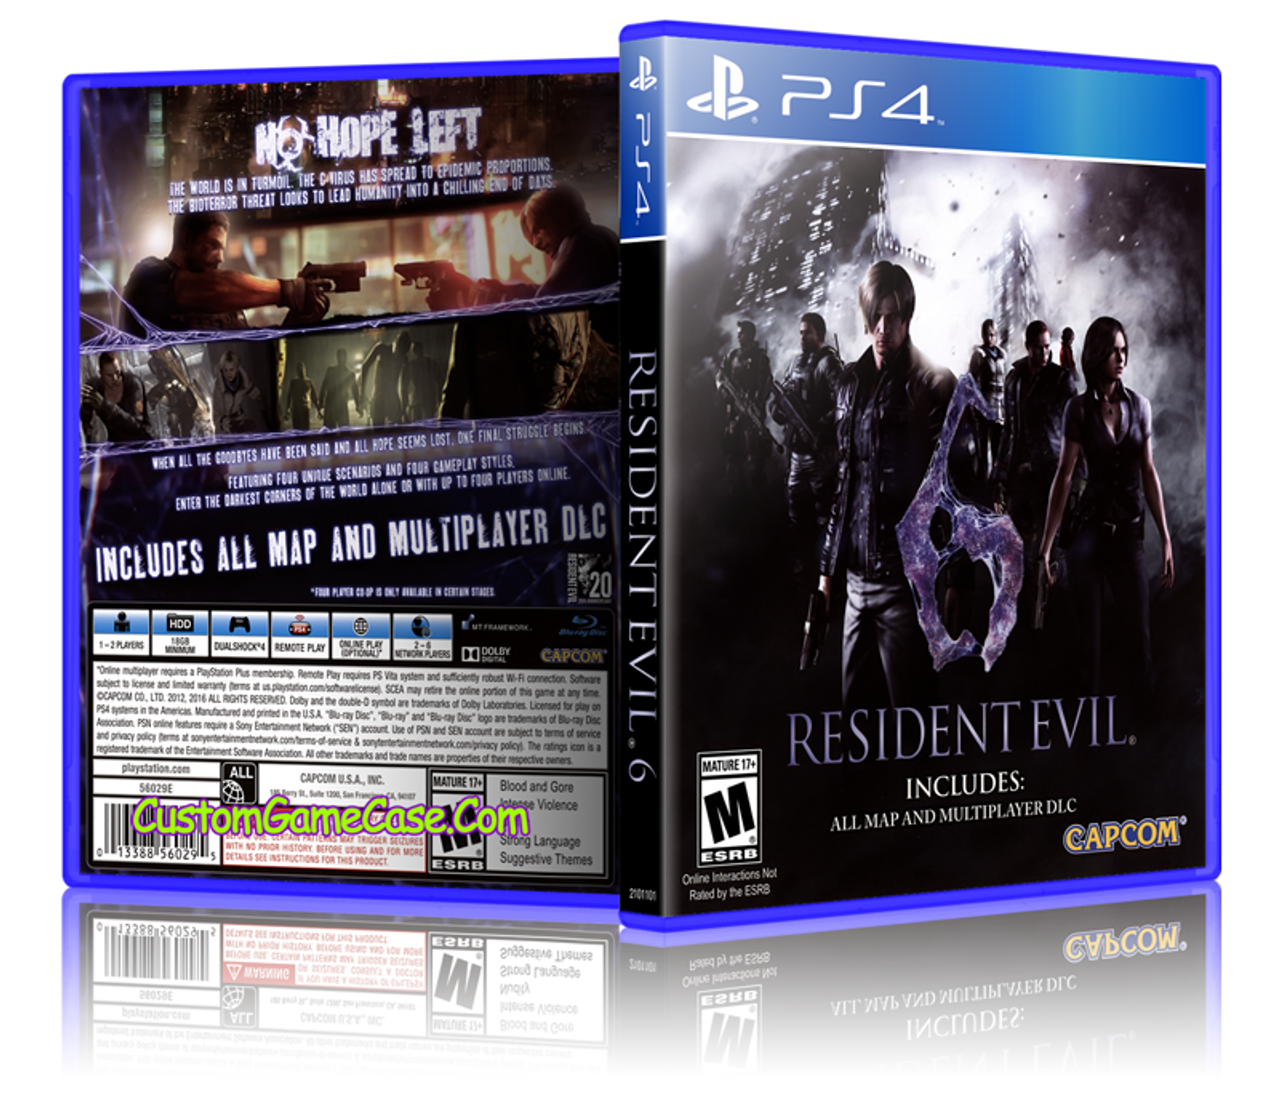 XBOX PS4 Resident Evil HD CUSTOM REPLACEMENT CASE NO DISC SEE